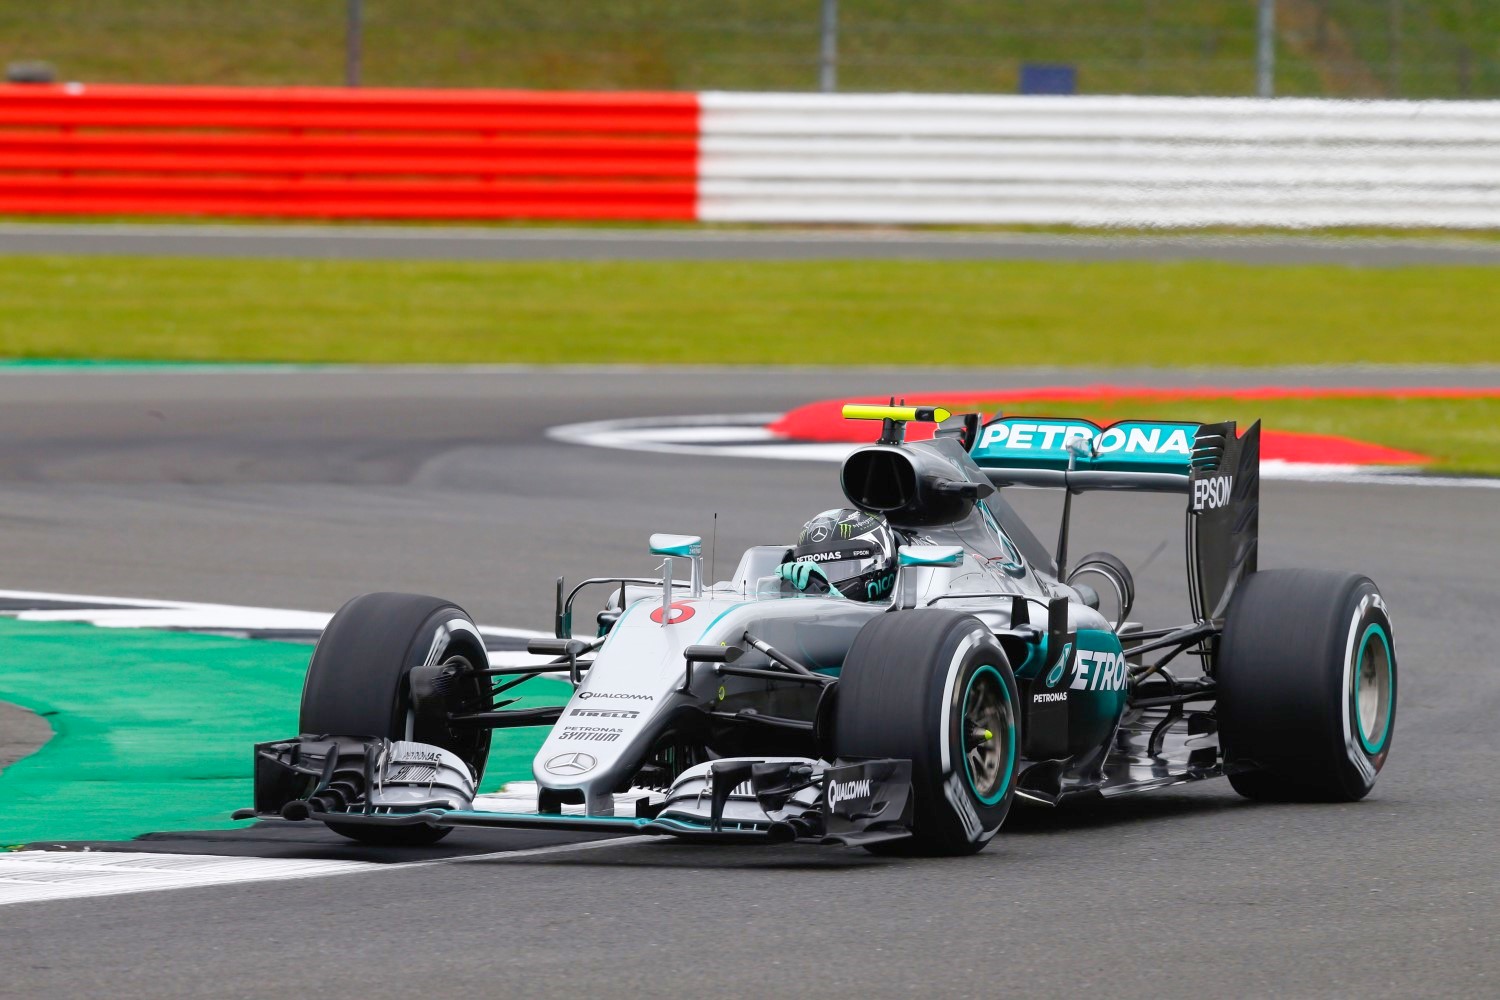 Rosberg demoted to third